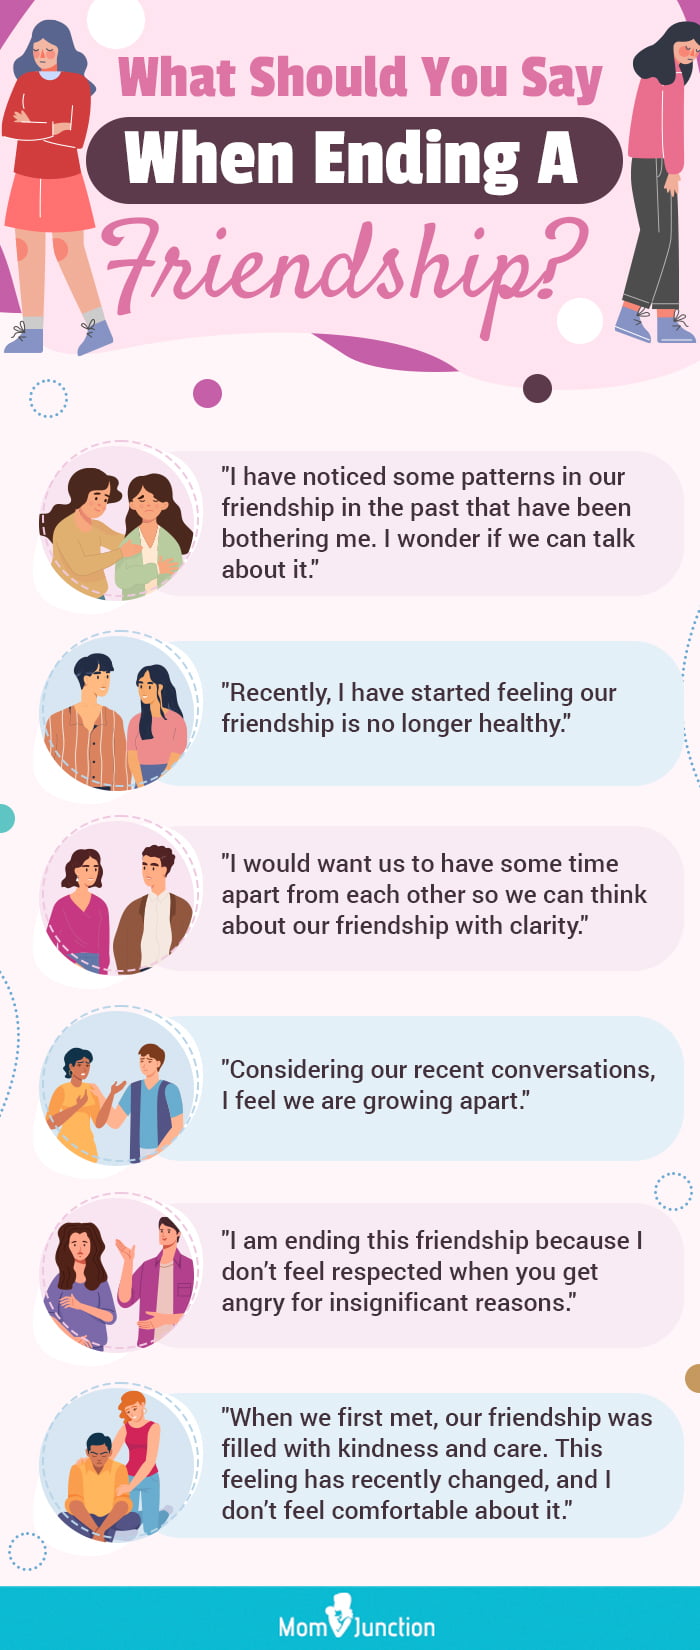 What to Say to End a Friendship